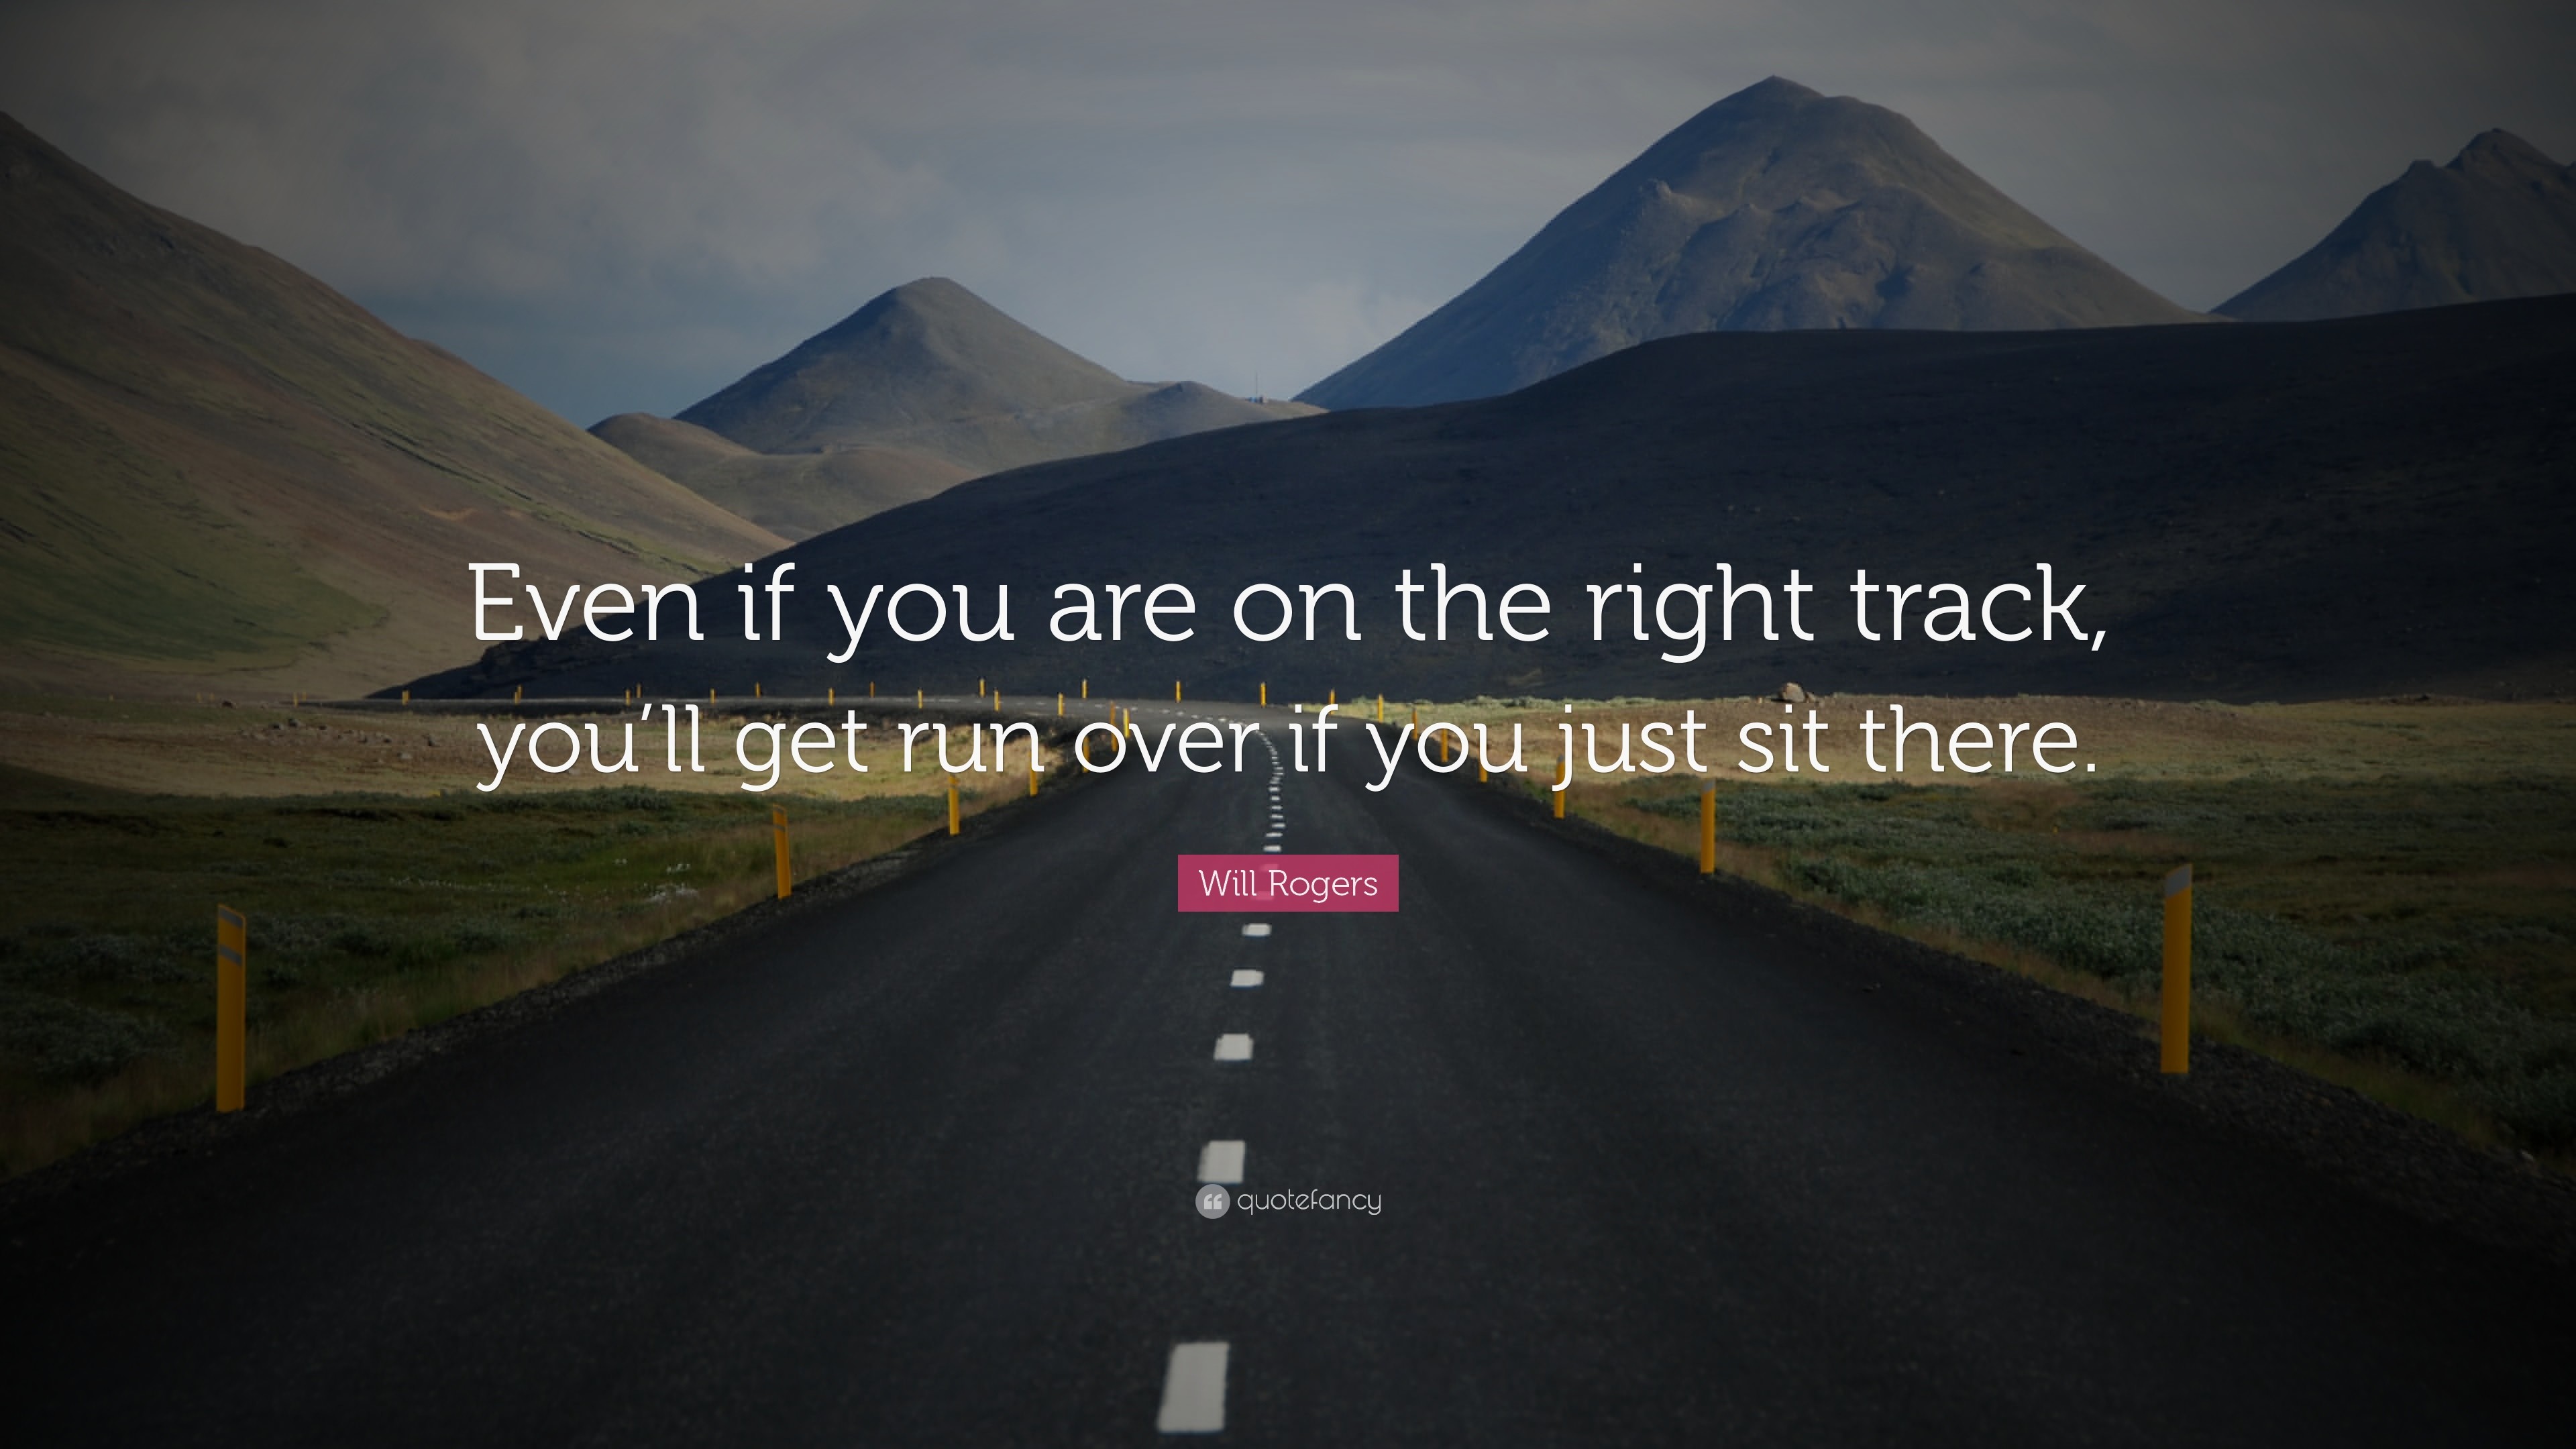 3840x2160 Positive Quotes: “Even if you are on the right track, you'll